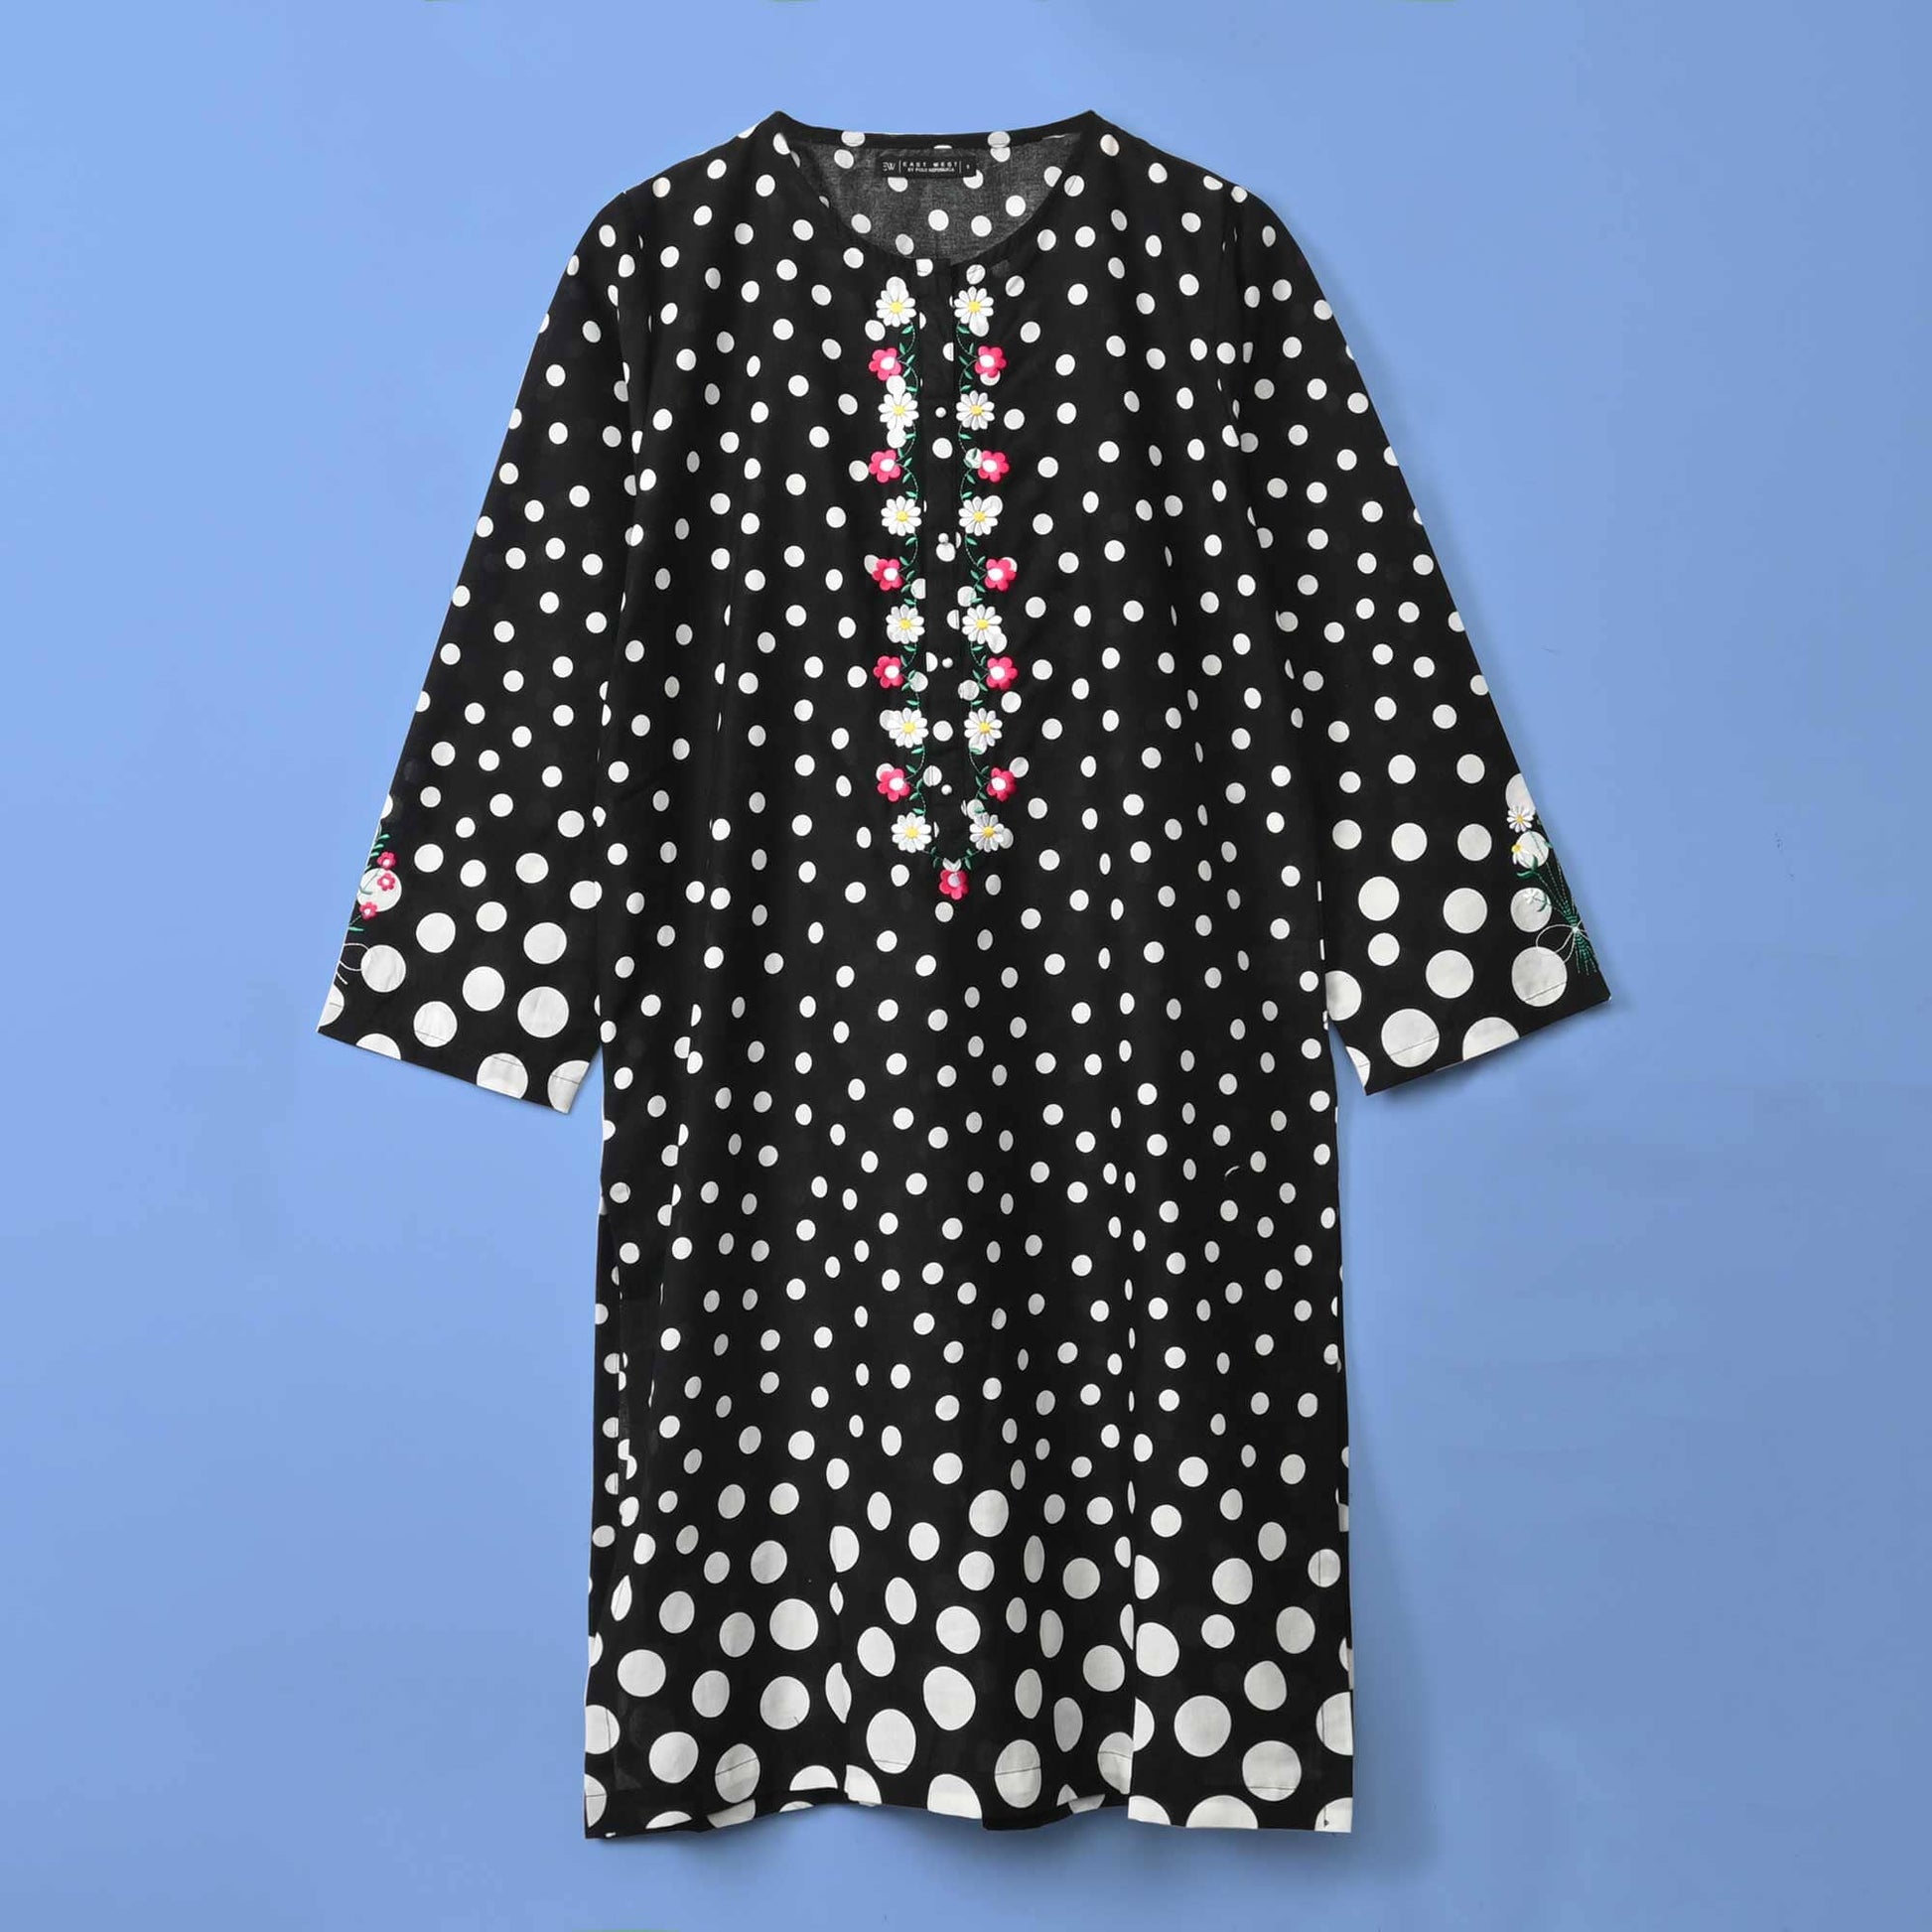 East West By Polo Republica Women’s Polka Dots Floral Embroidered Shirt Women's Kurti Polo Republica Black XS 